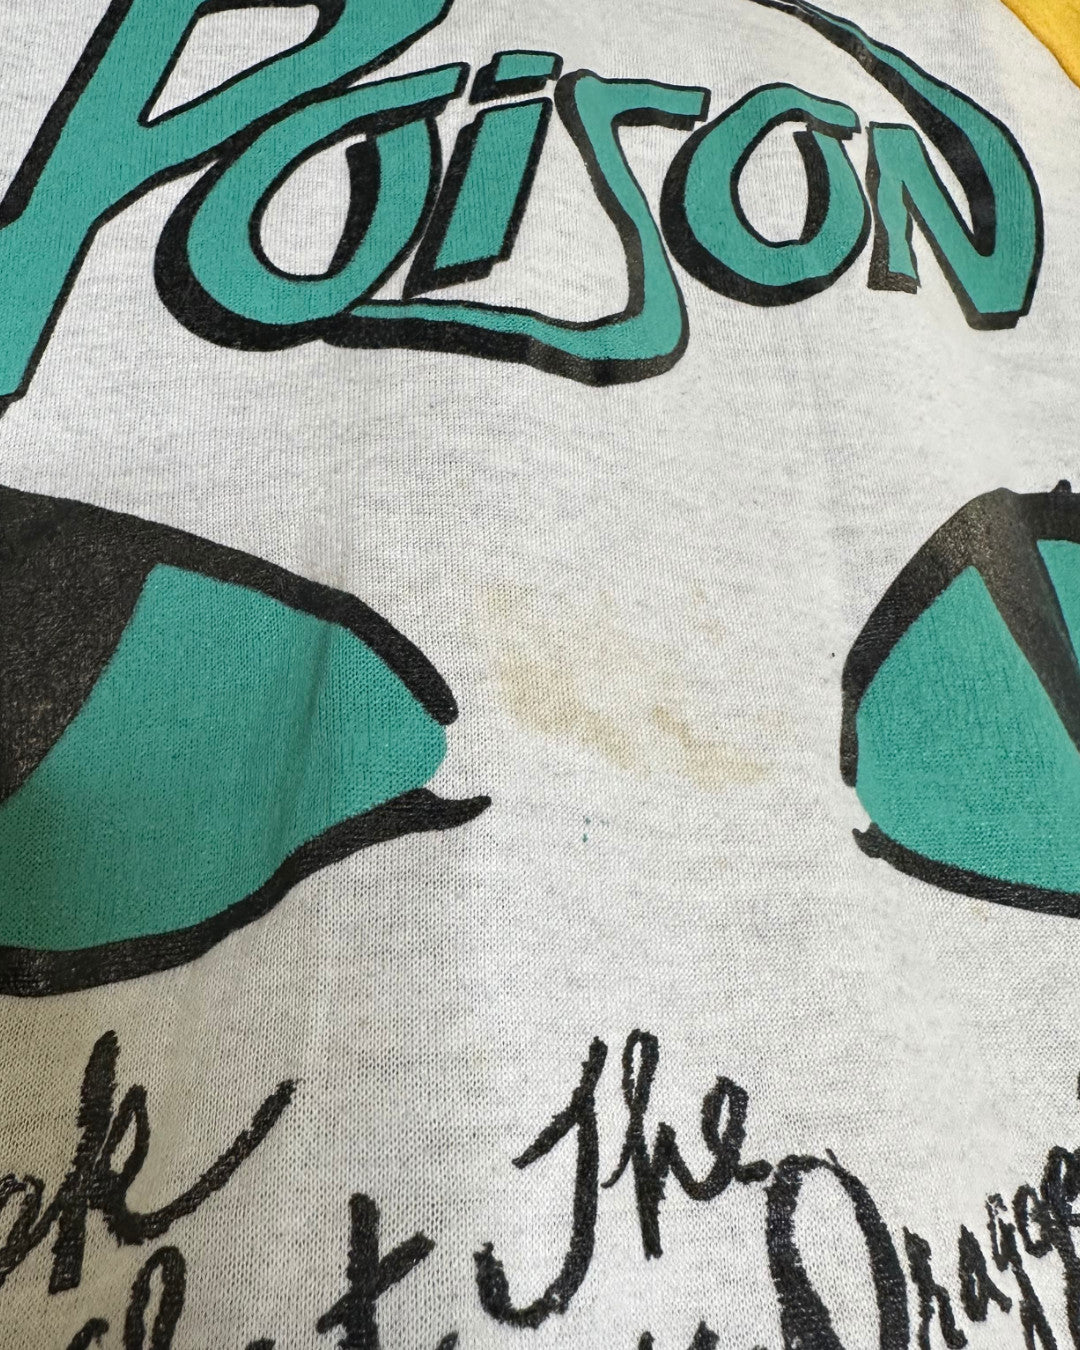 Poison 1986 Look What The Cat Dragged In Raglan/Baseball T-Shirt, White w/Yellow Arms, M (Tagged XL)(Measures 26” Waist, 28” Long, 19” Pit To Pit) - Darkside Records